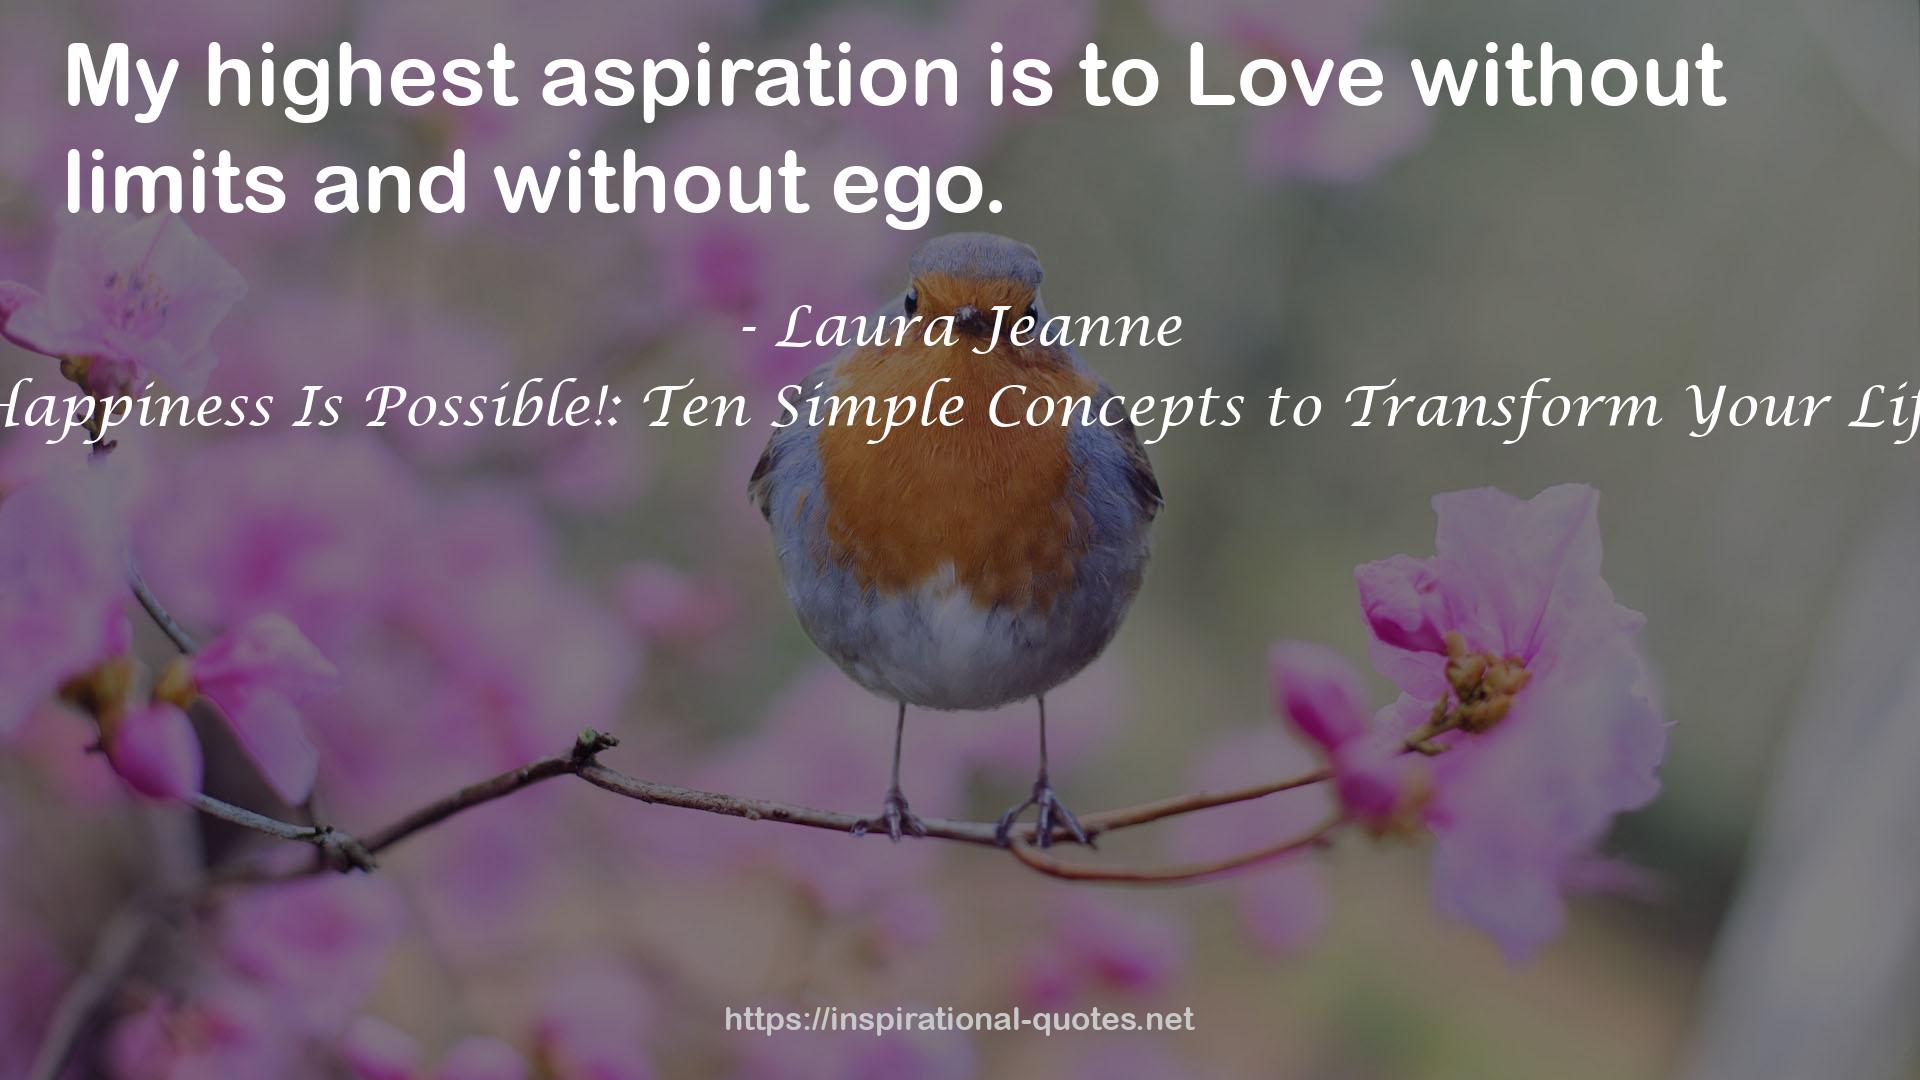 Happiness Is Possible!: Ten Simple Concepts to Transform Your Life QUOTES